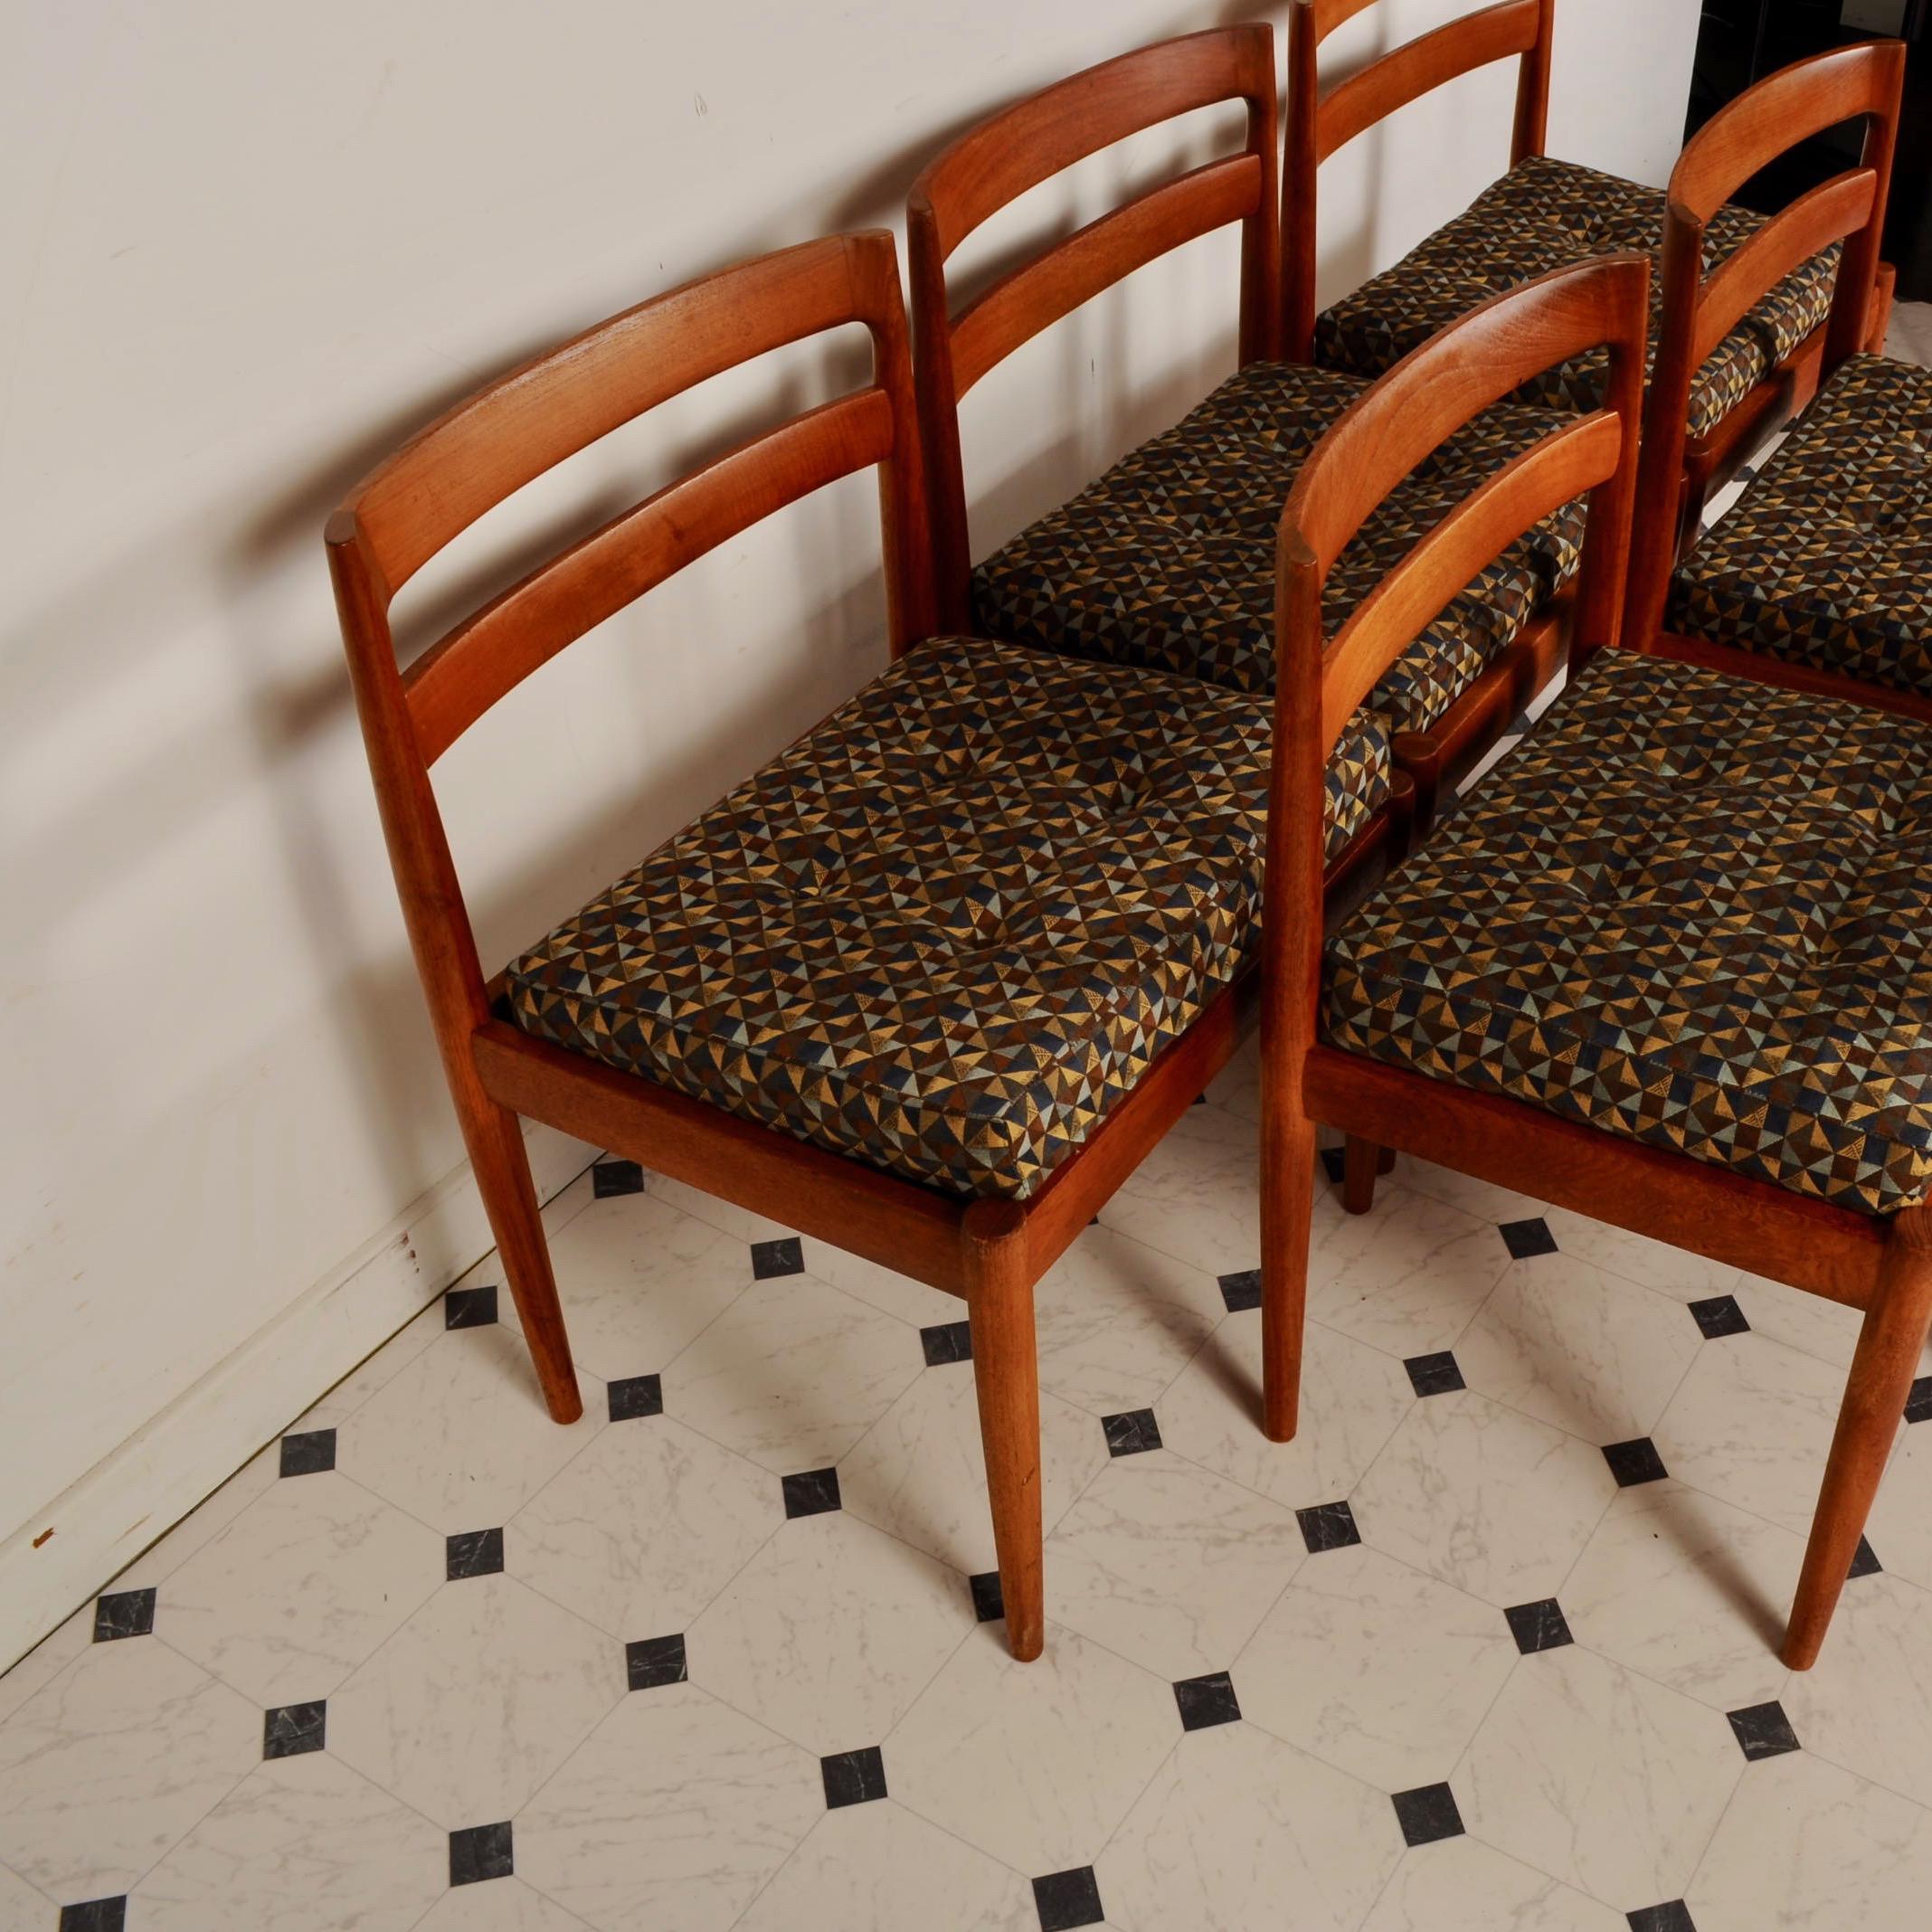 Nice clean set of side chairs, model 301 / Universe, designed by Kai Kristiansen. Produced by Magnus Olesen in Denmark. Almost all model 301 chairs were made in rosewood. This set of six in teak is super rare. Clean, recently upholstered seat